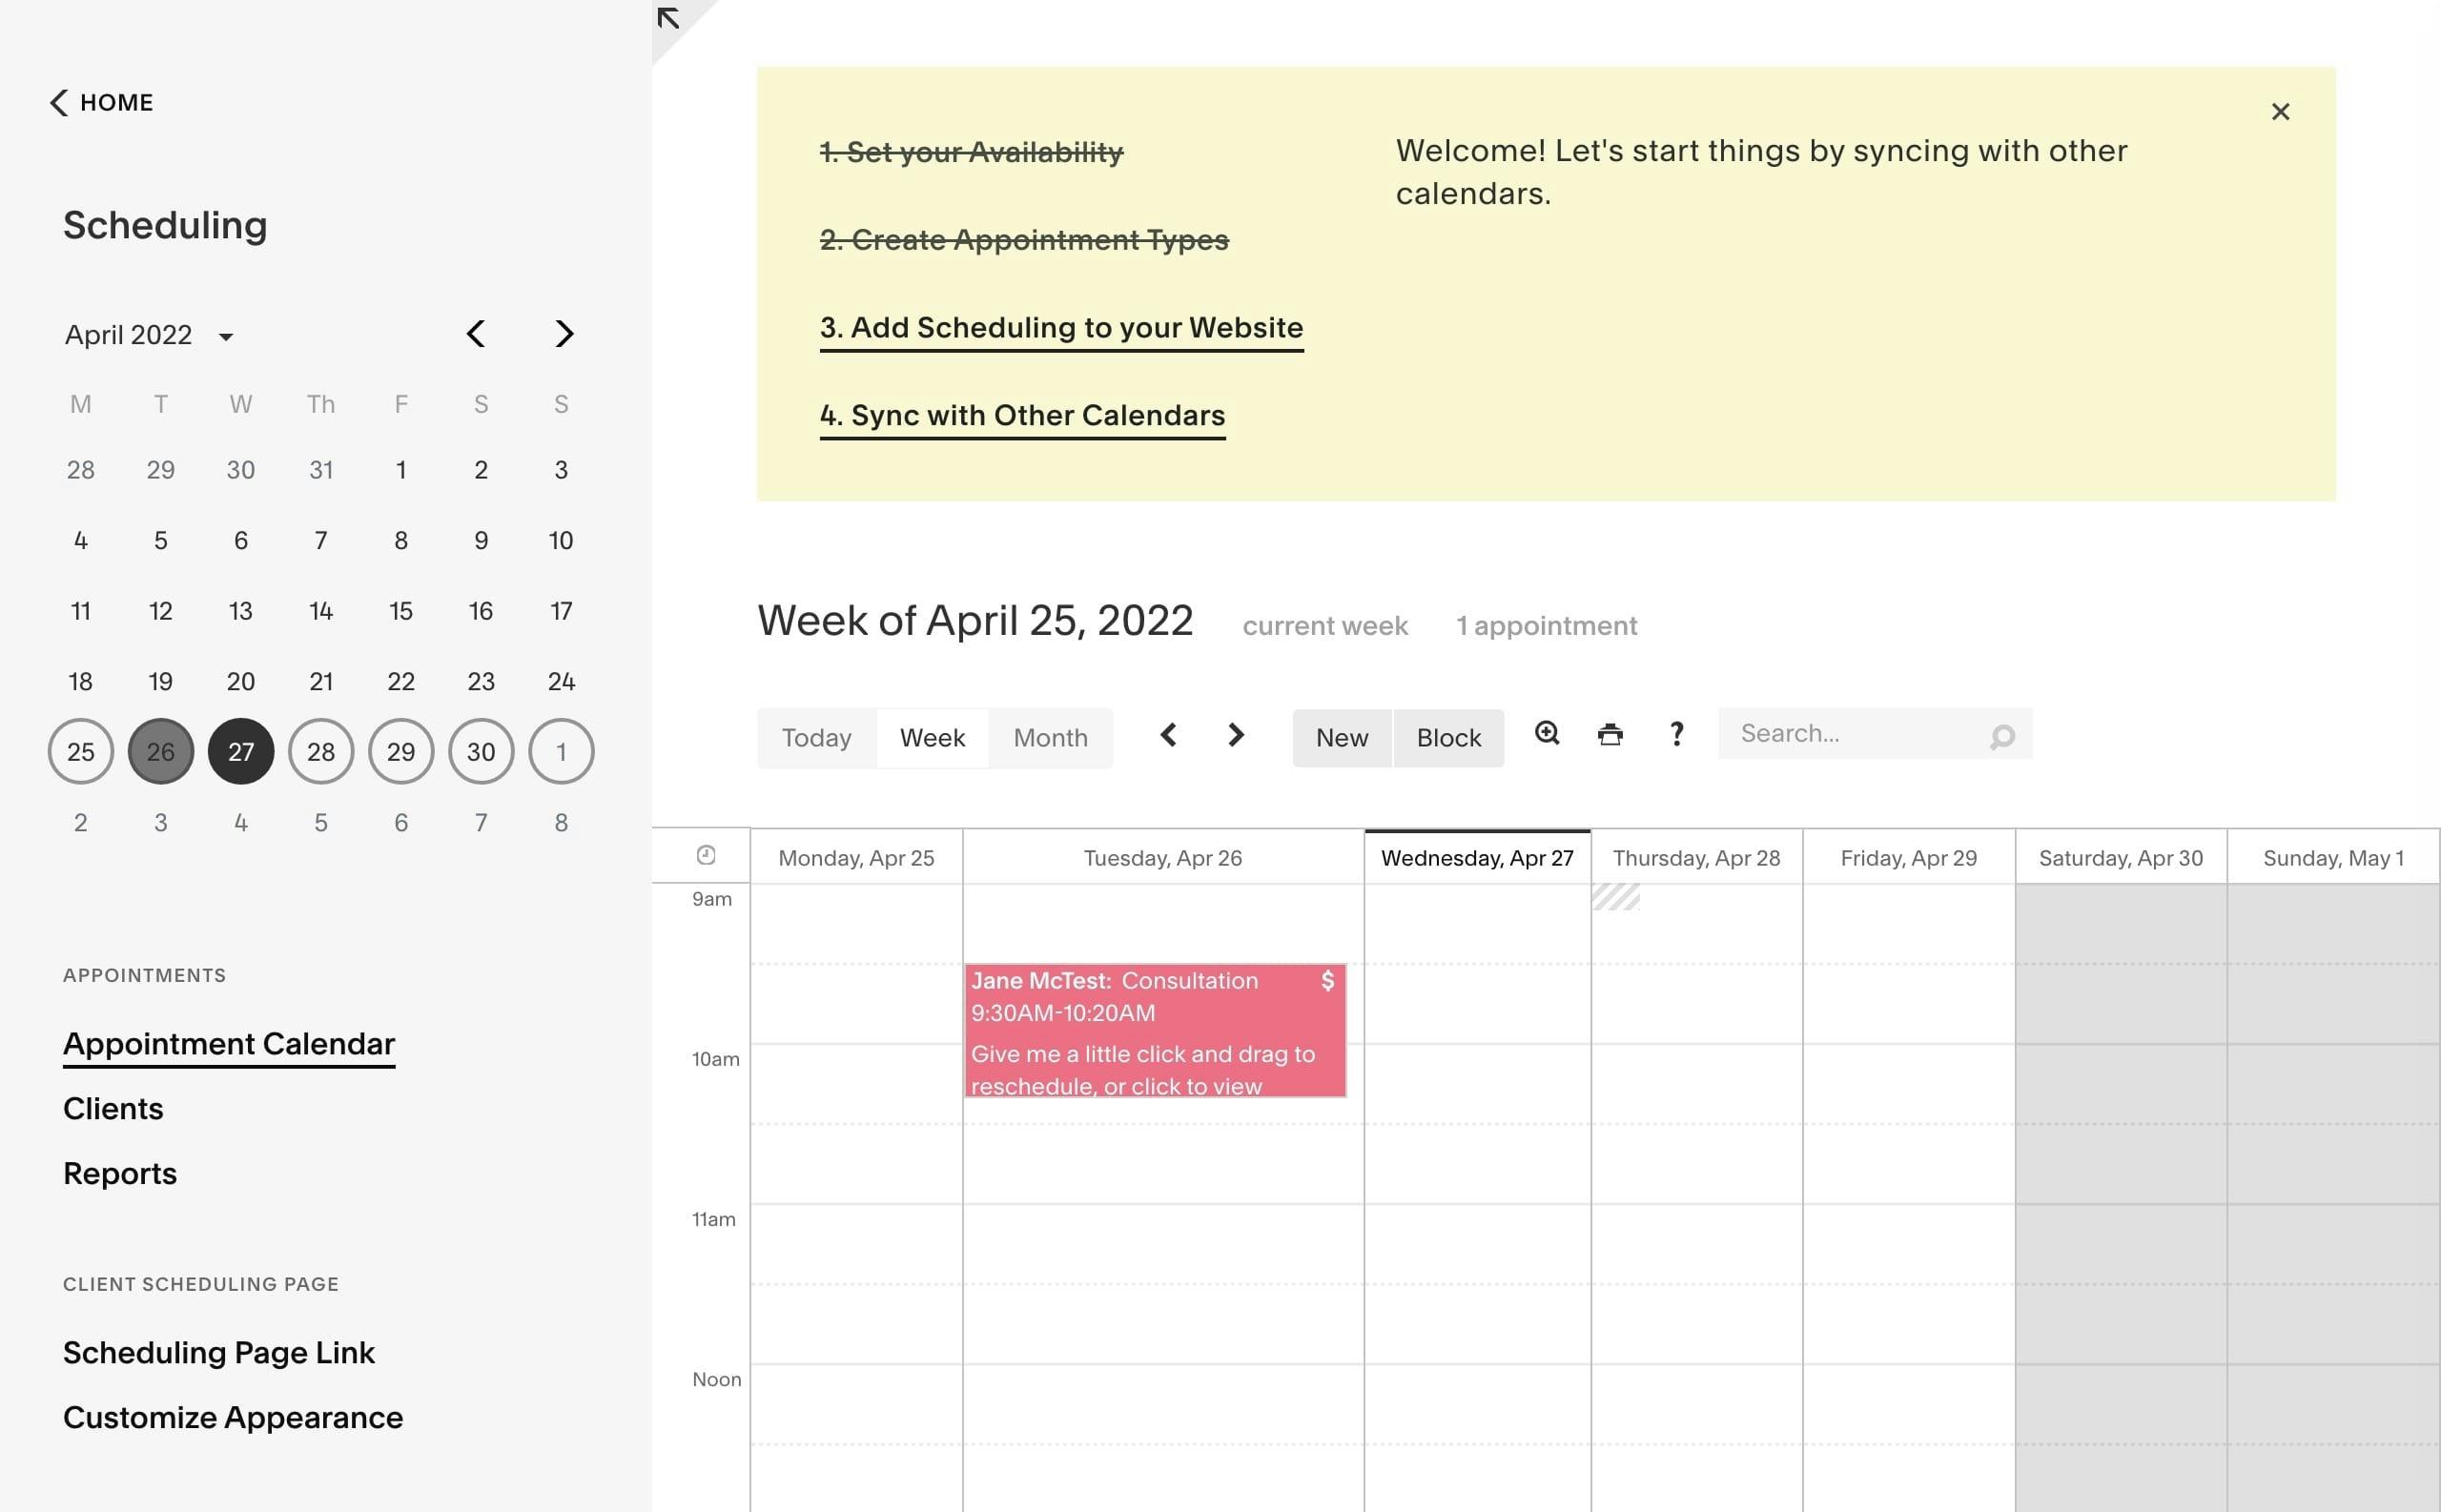 Squarespace Scheduling